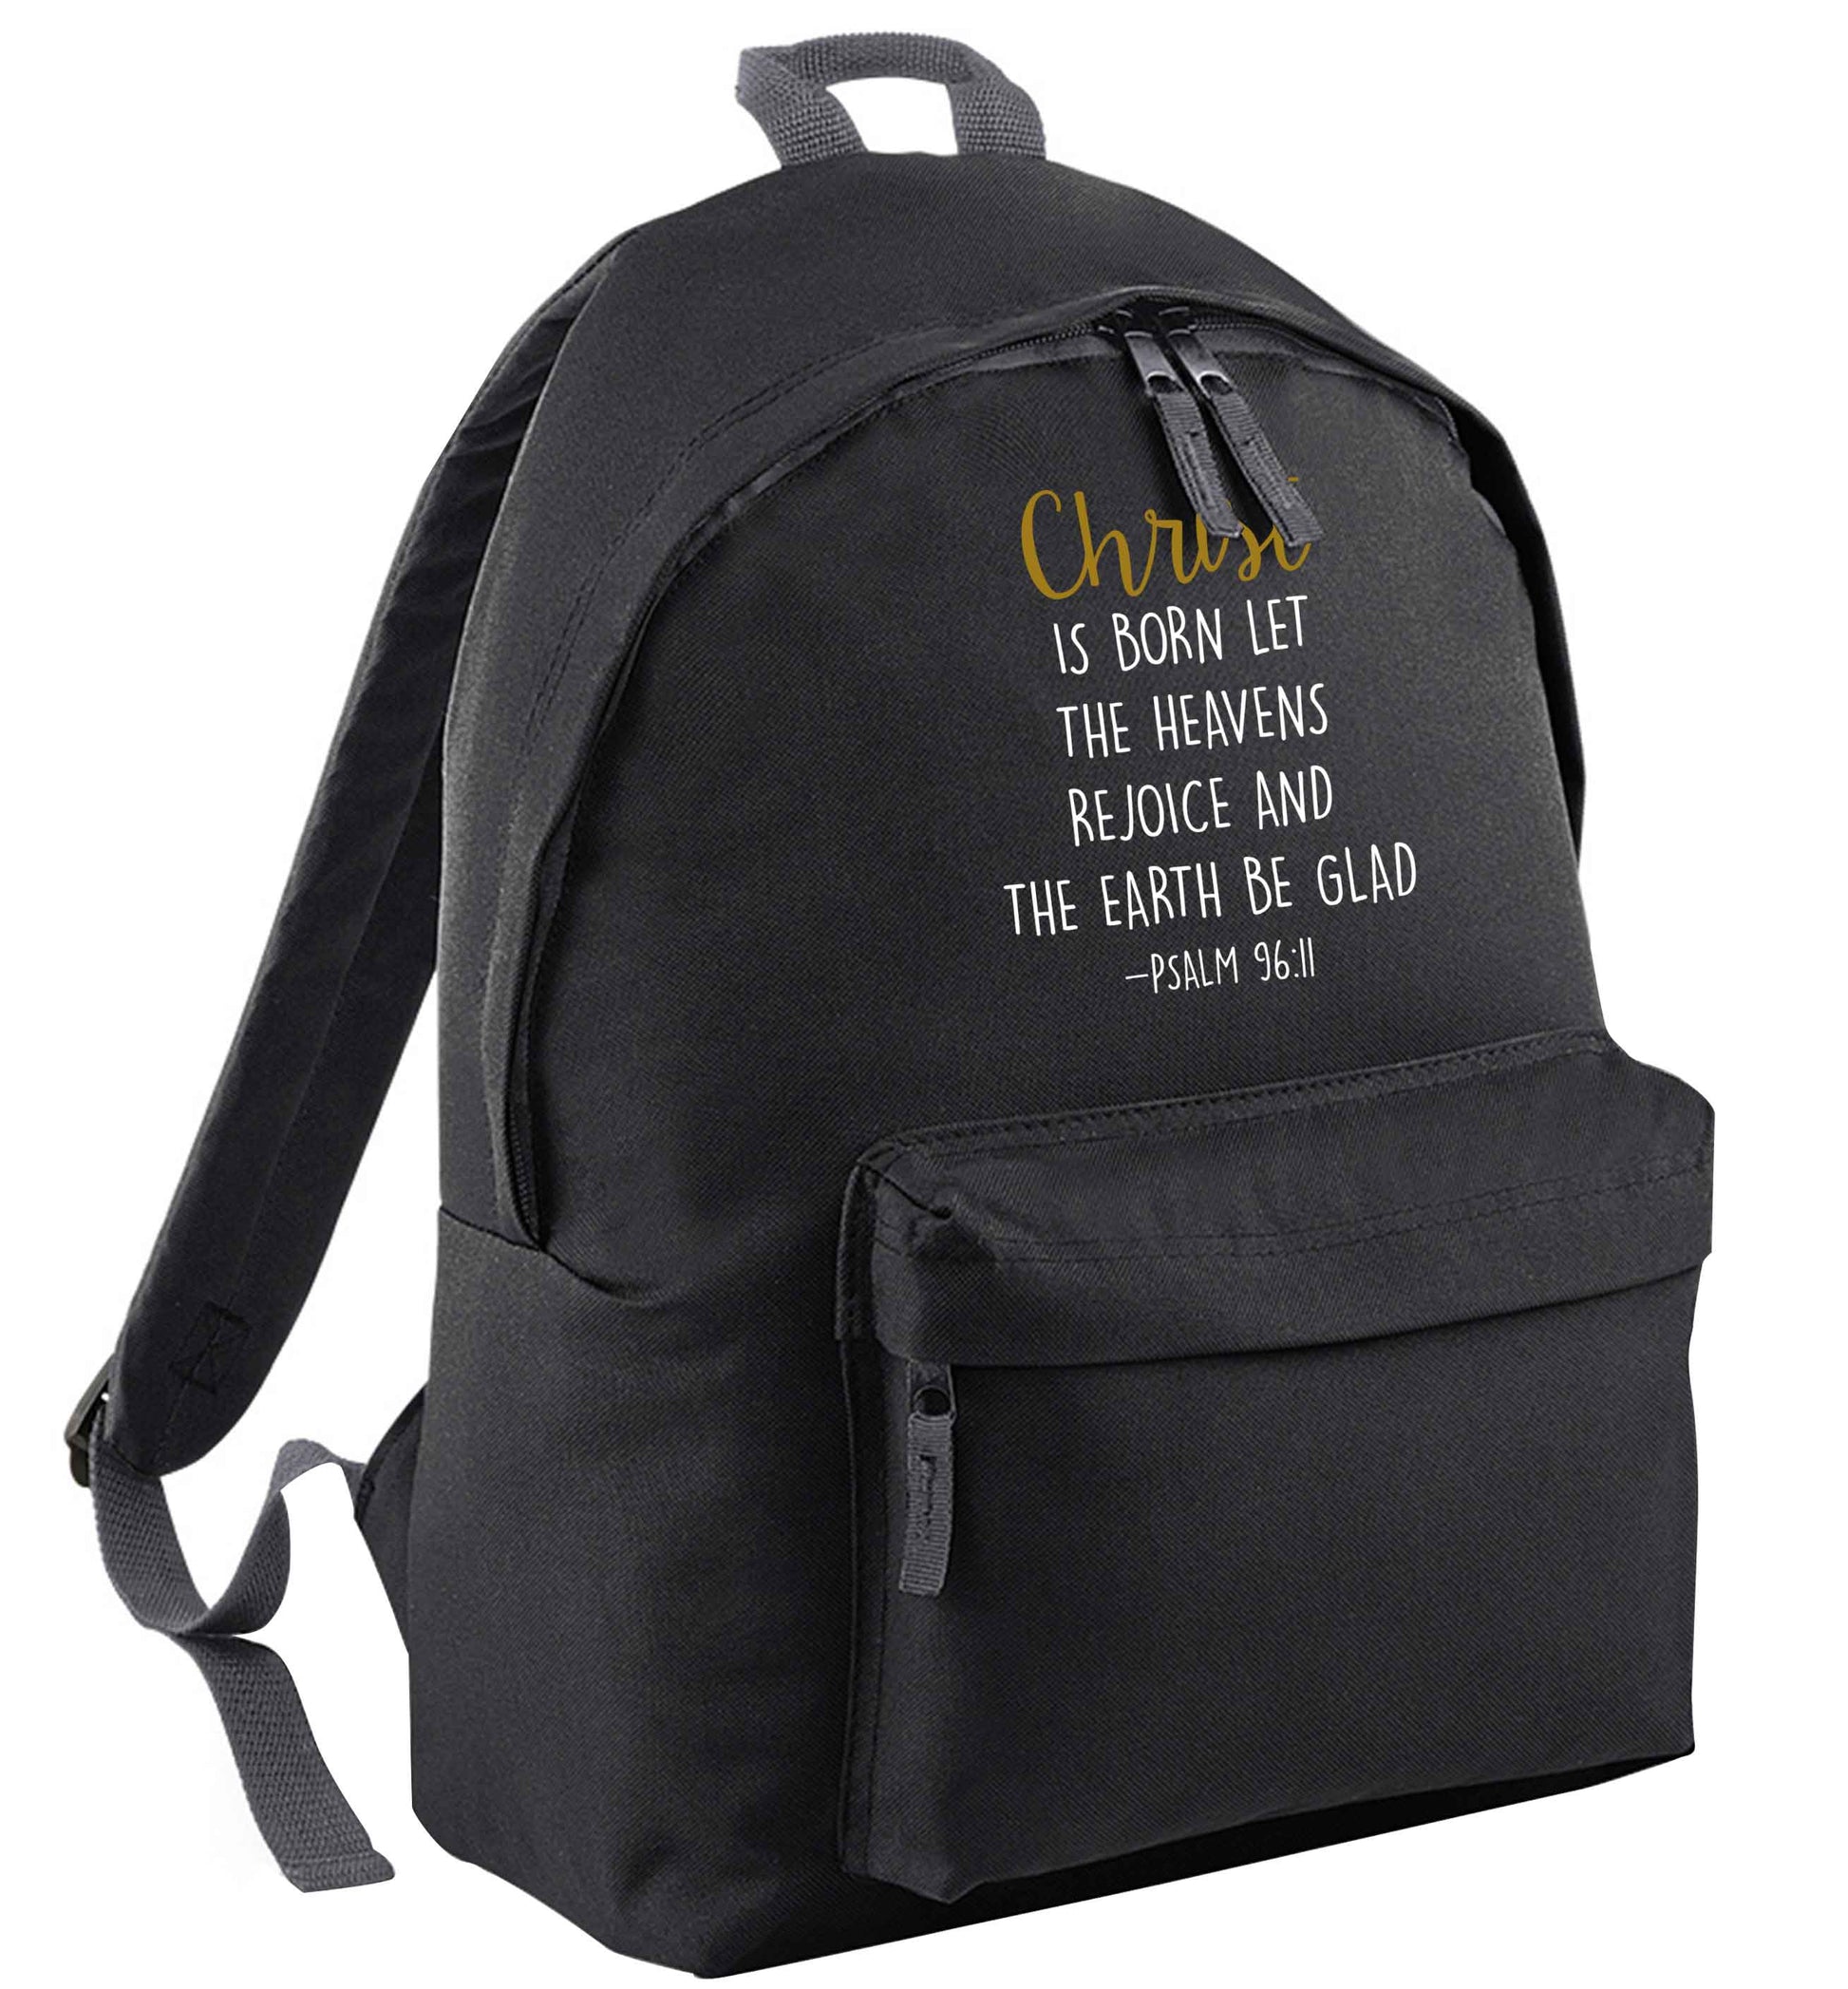 Christ is Born Psalm 96:11 black adults backpack